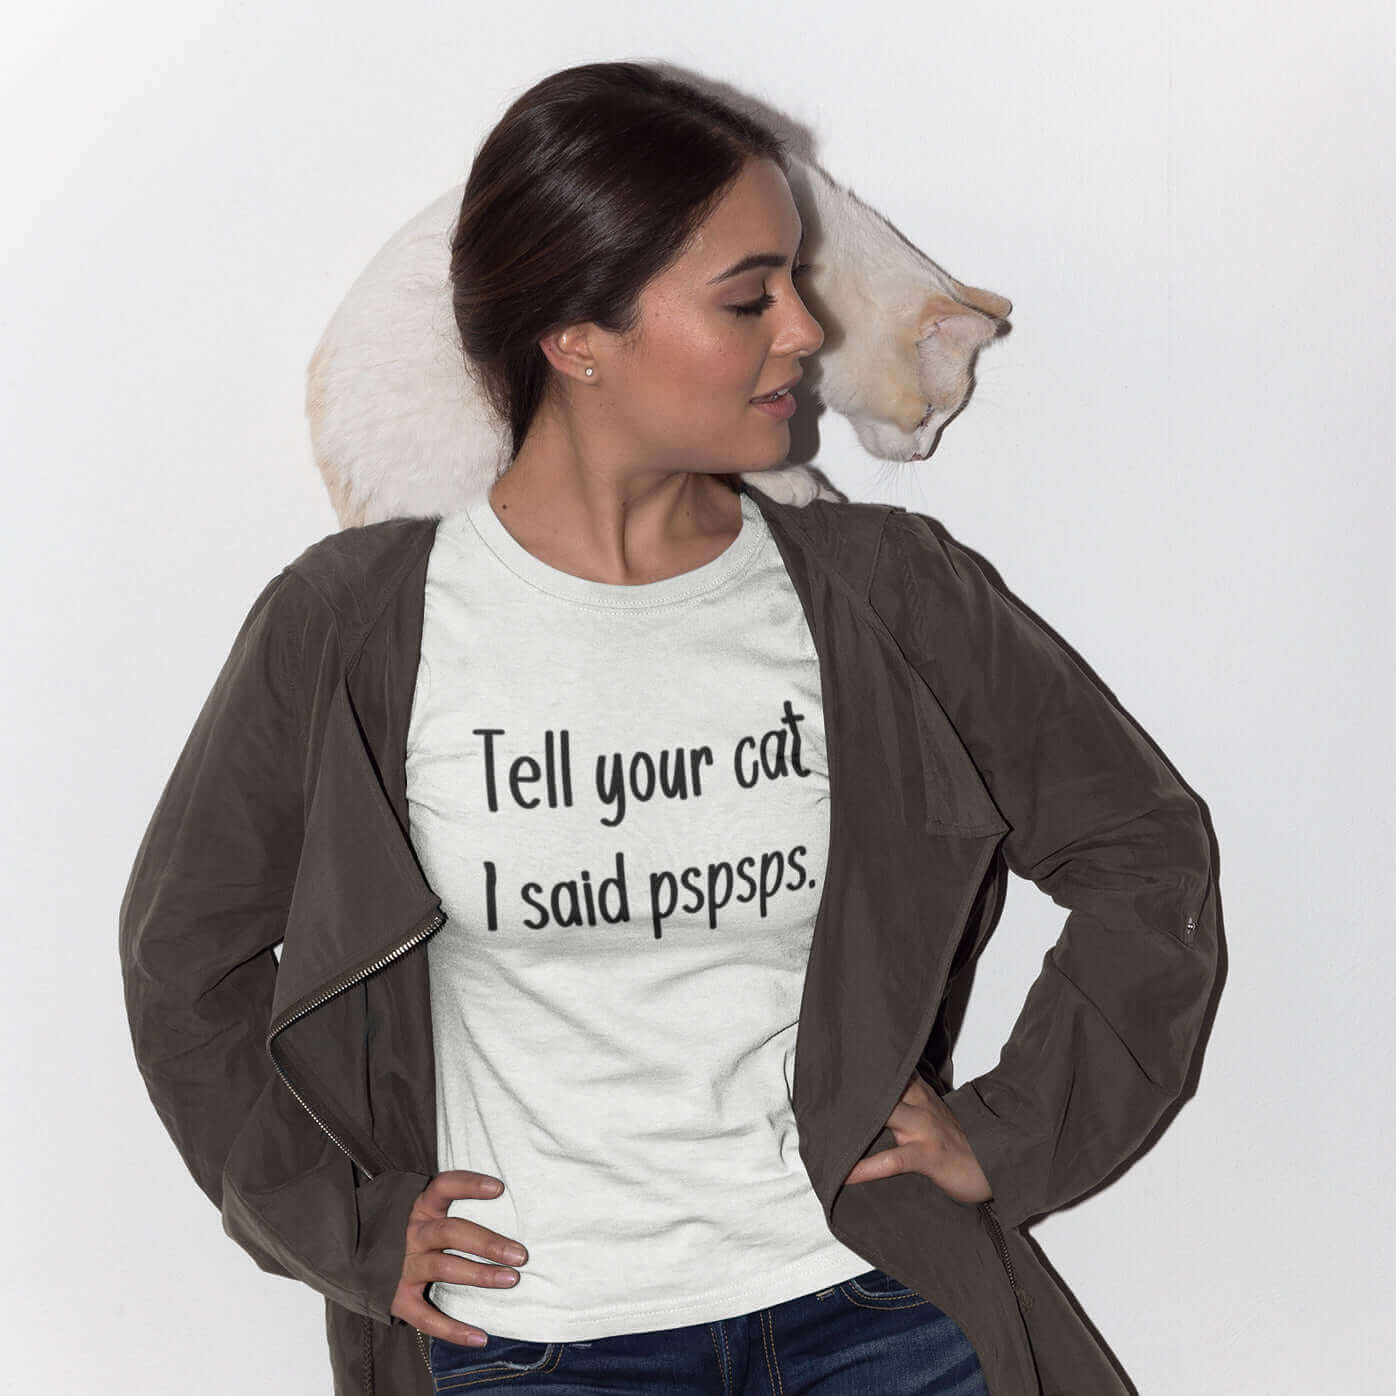 Woman with a cat wearing a white t-shirt with the words Tell your cat I said pspsps printed on the front.